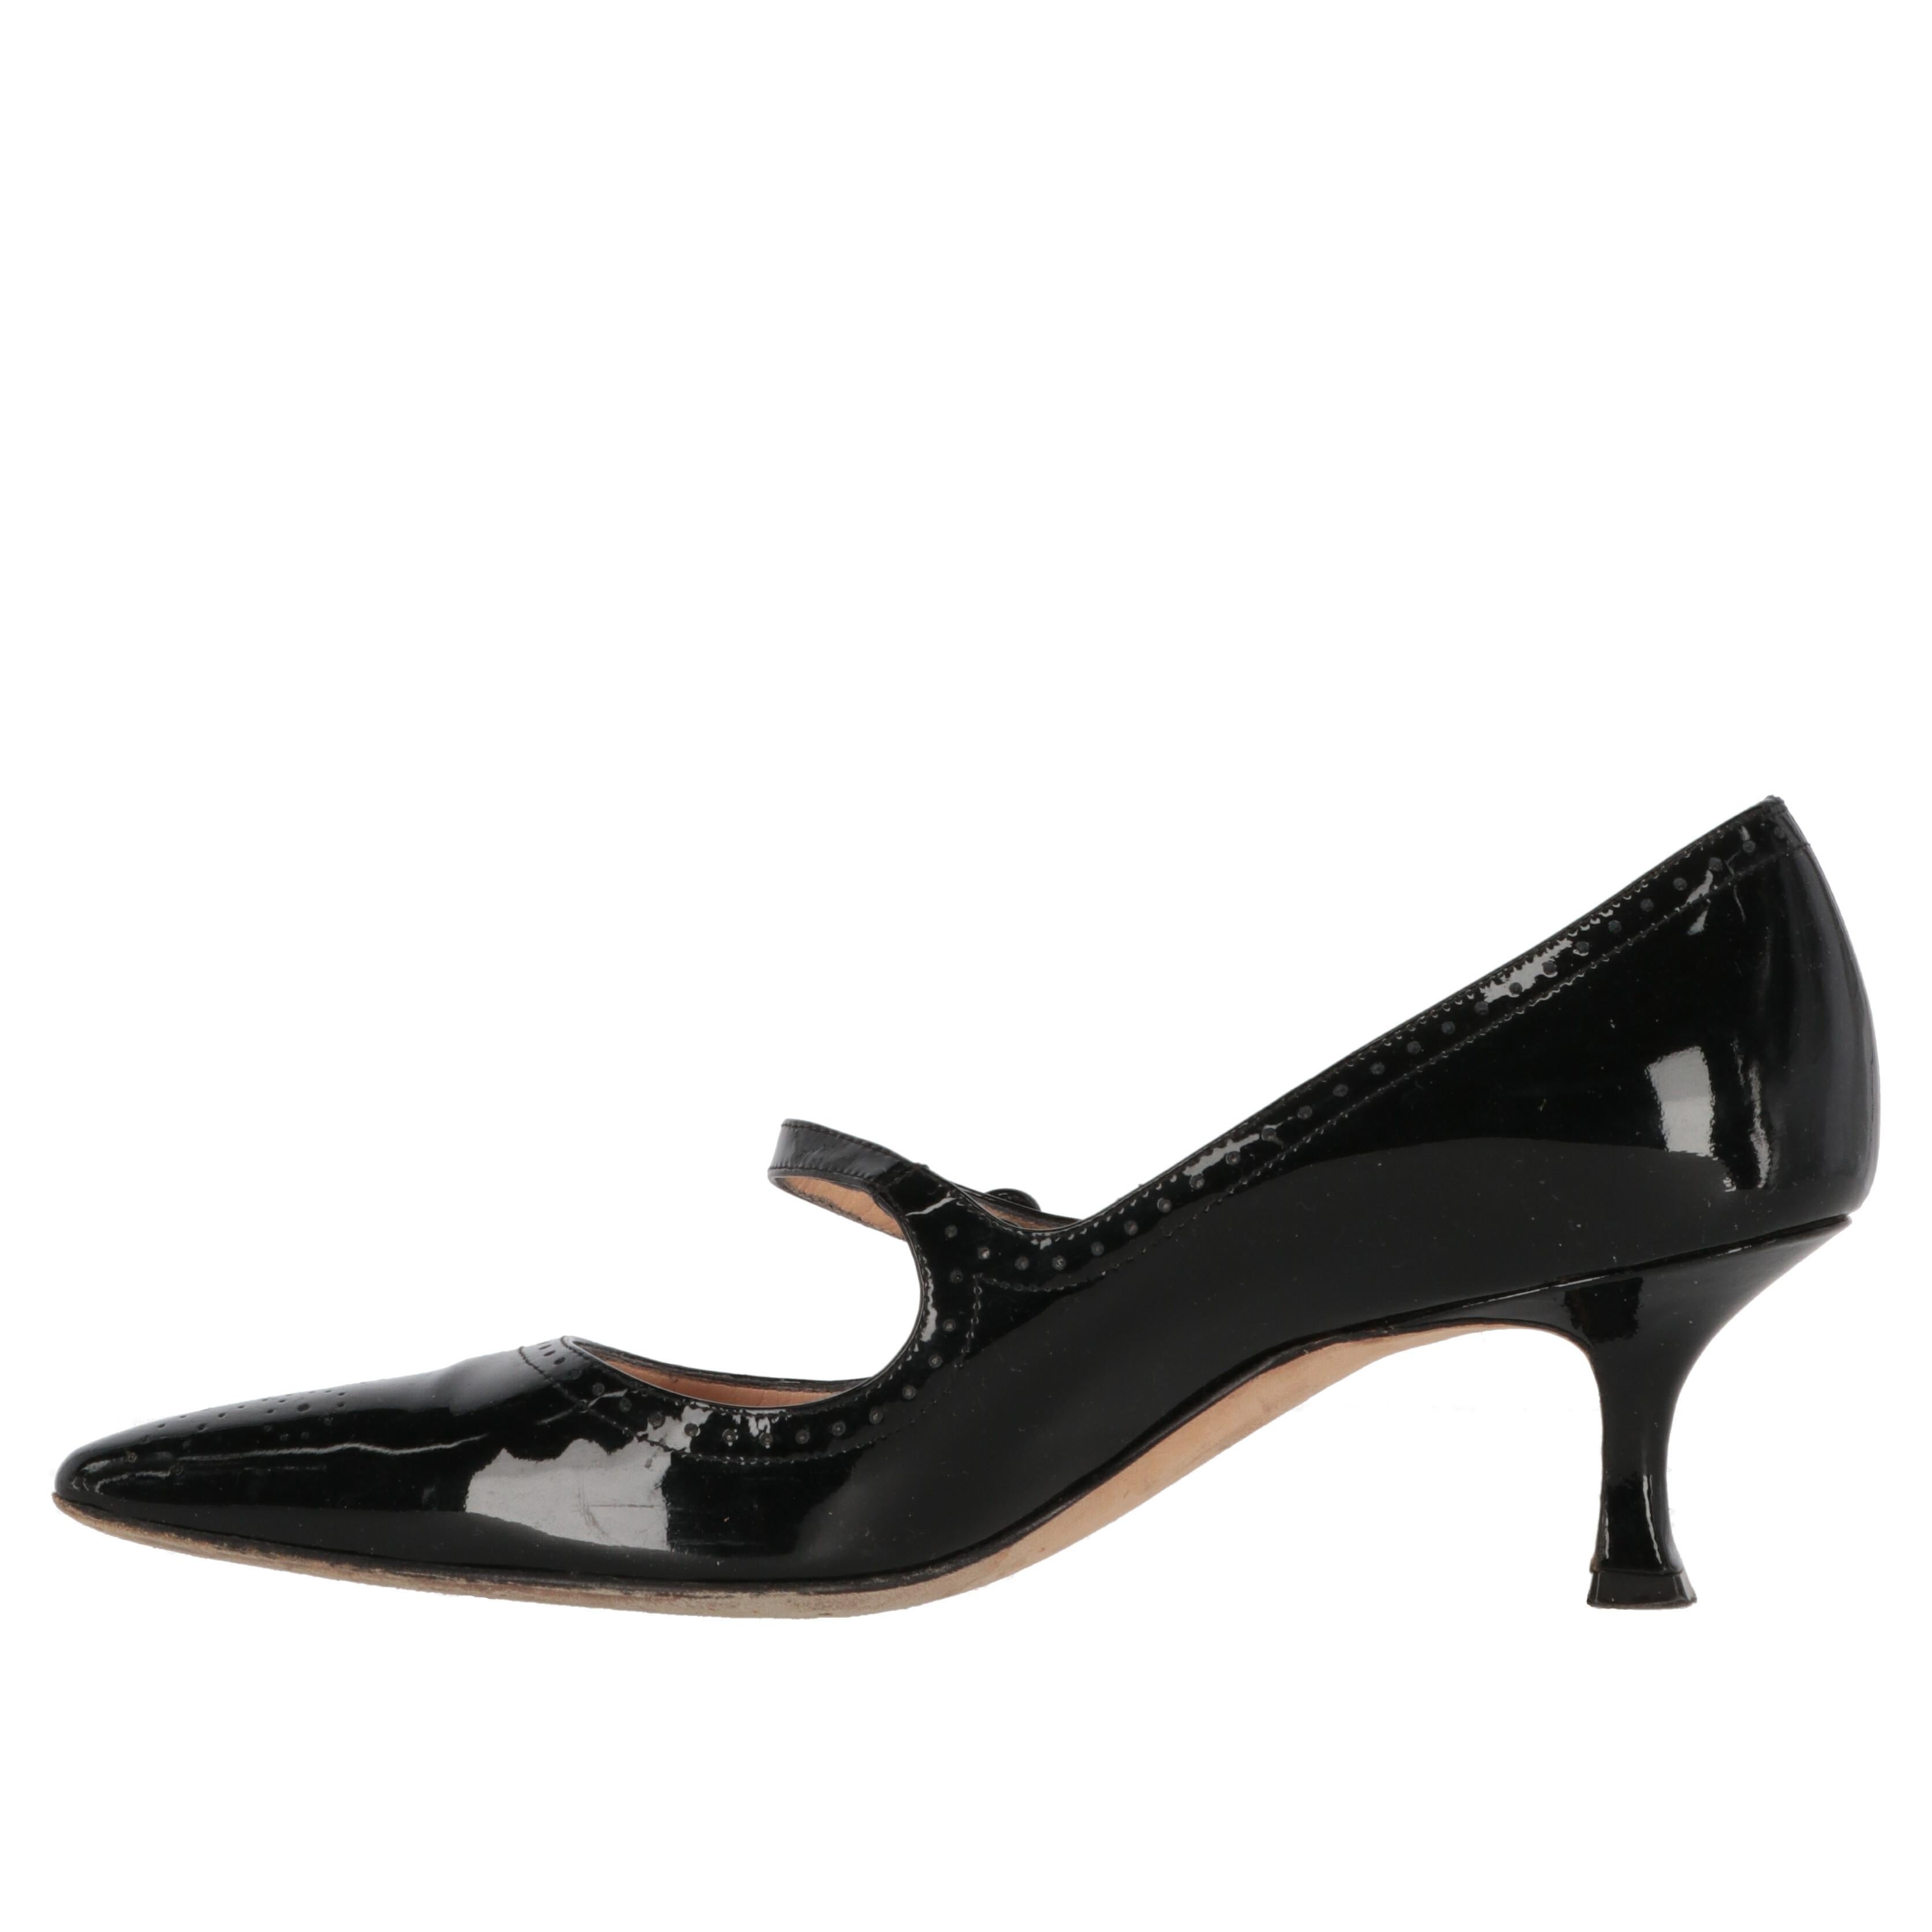 Manolo Blahnik black patent leather Mary Jane shoes with low heel, perforated details and strap with elastic button.

There are some slight signs of wear on the tip and creases from use, as shown in the pictures.

Years: 2000s

Hand made in